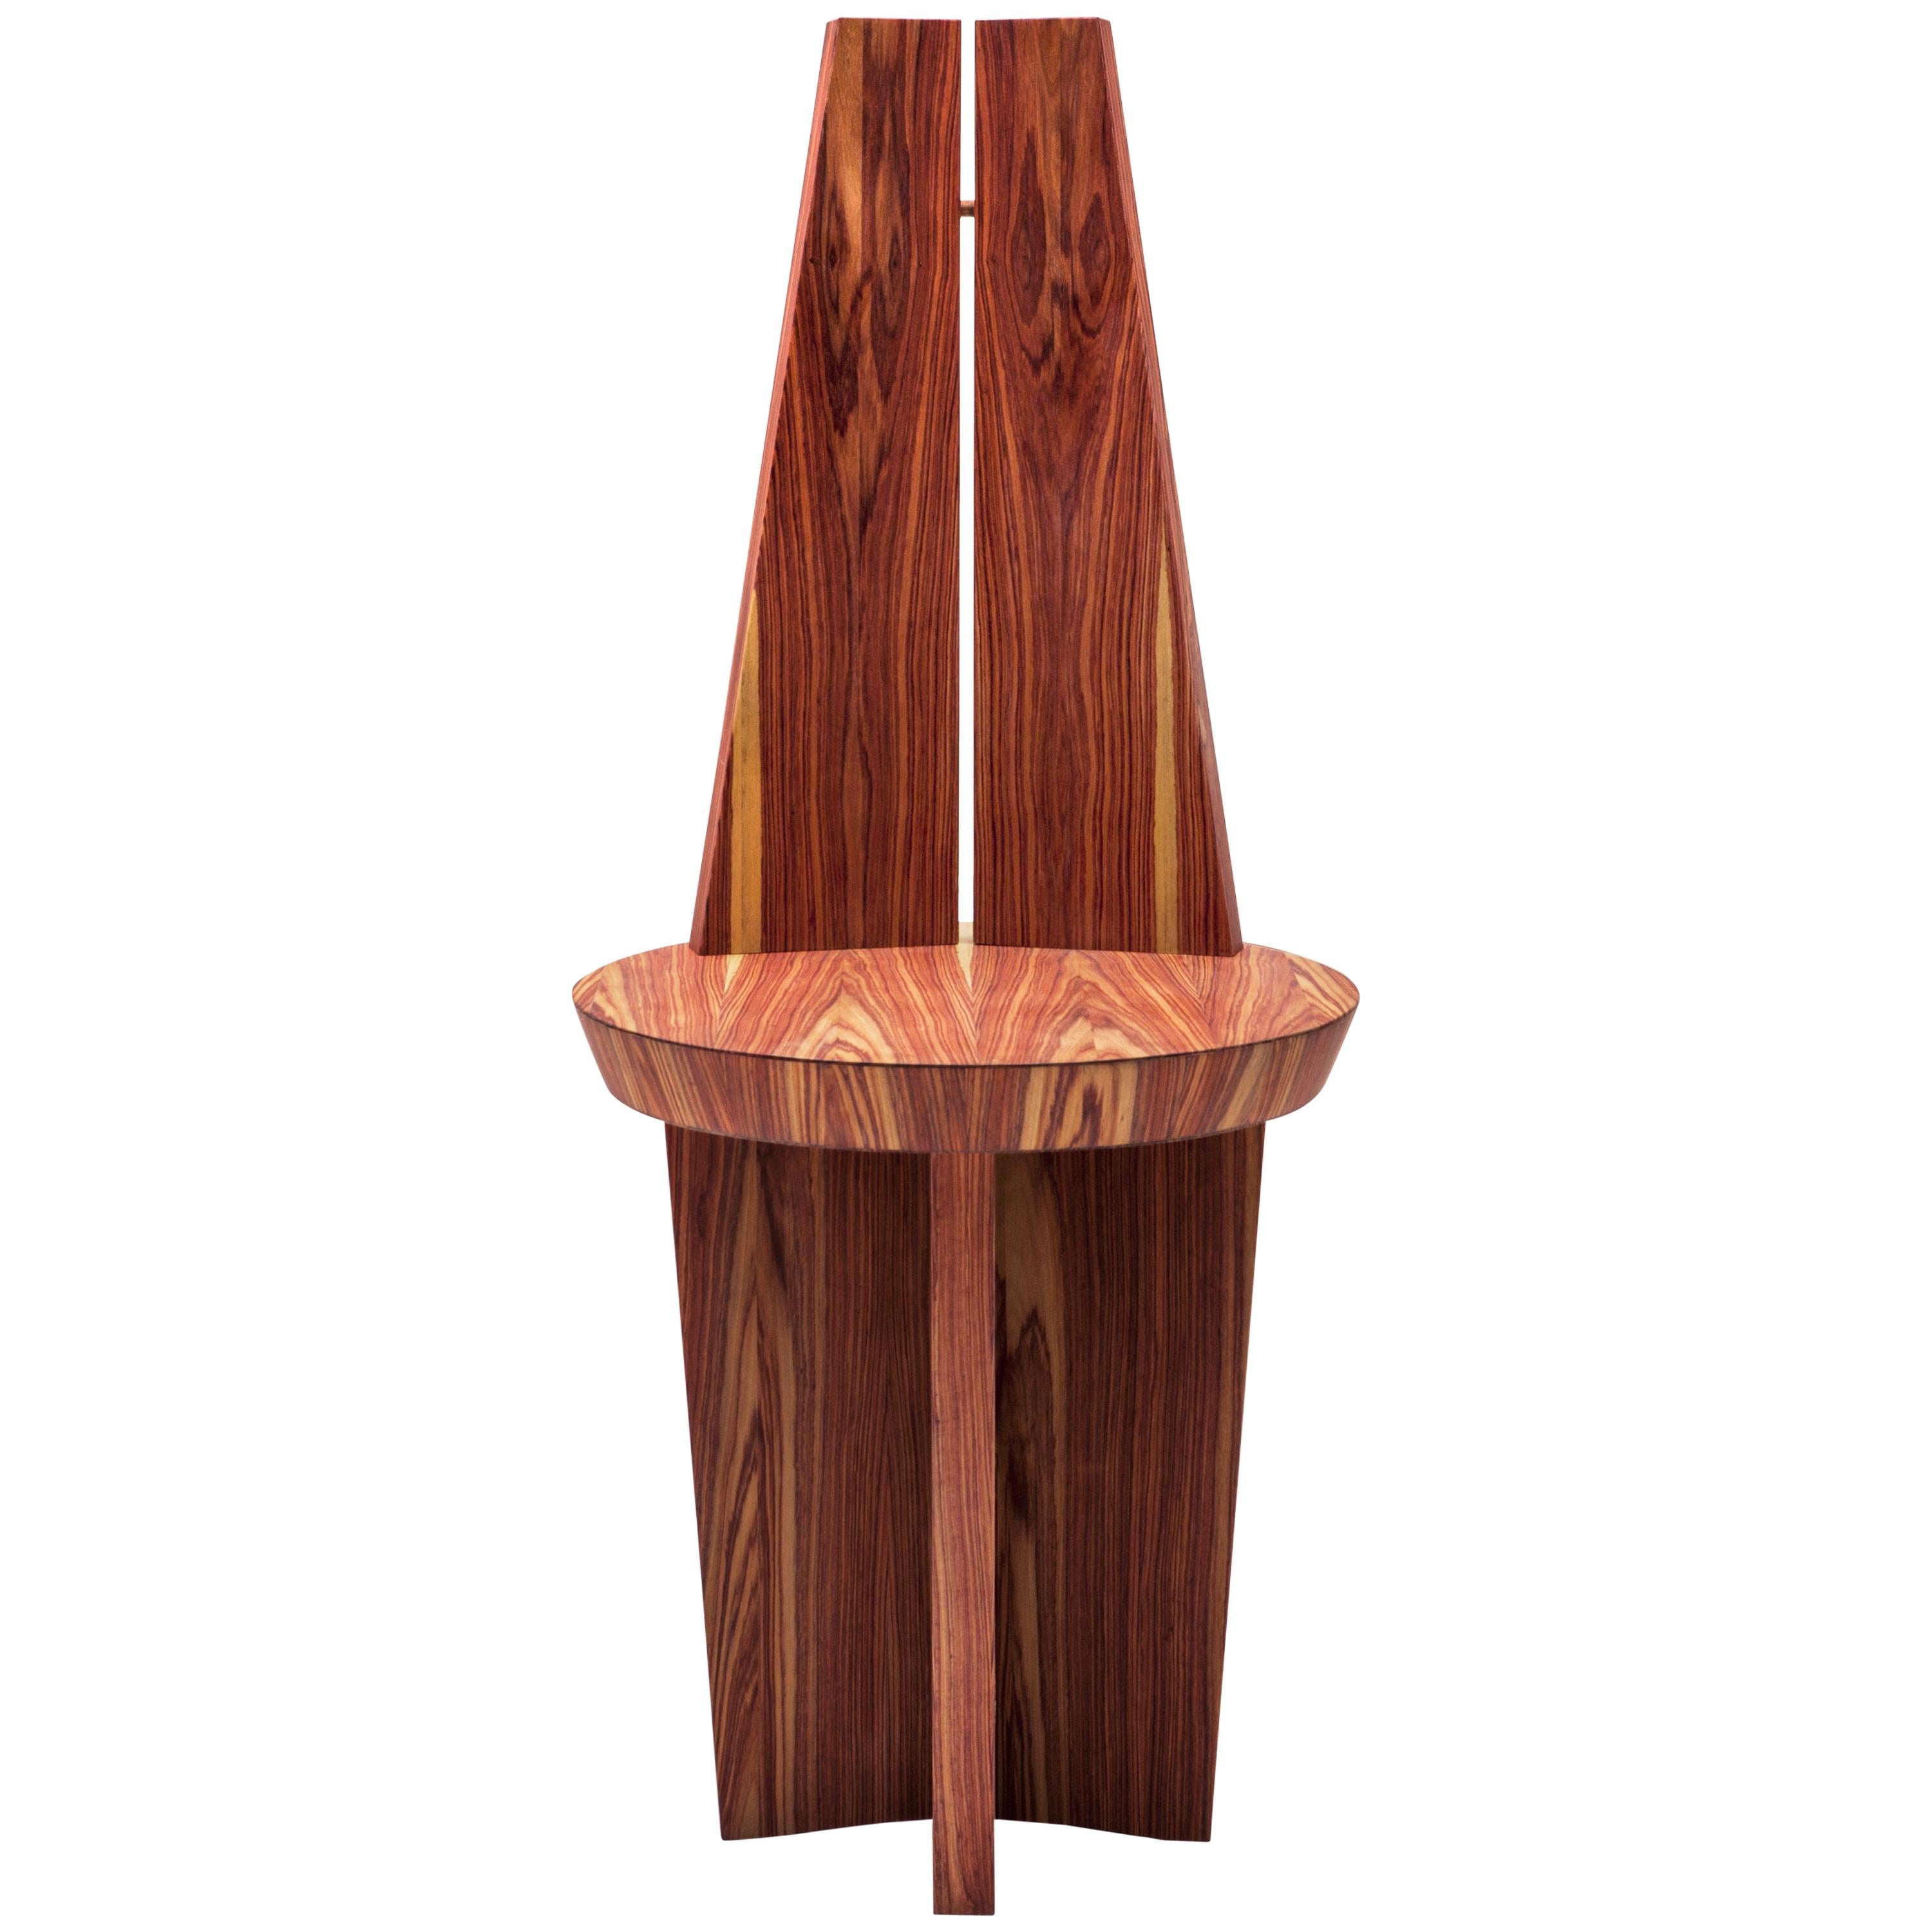 Copper and Wood Modern Dining Chair Sedia Povera For Sale